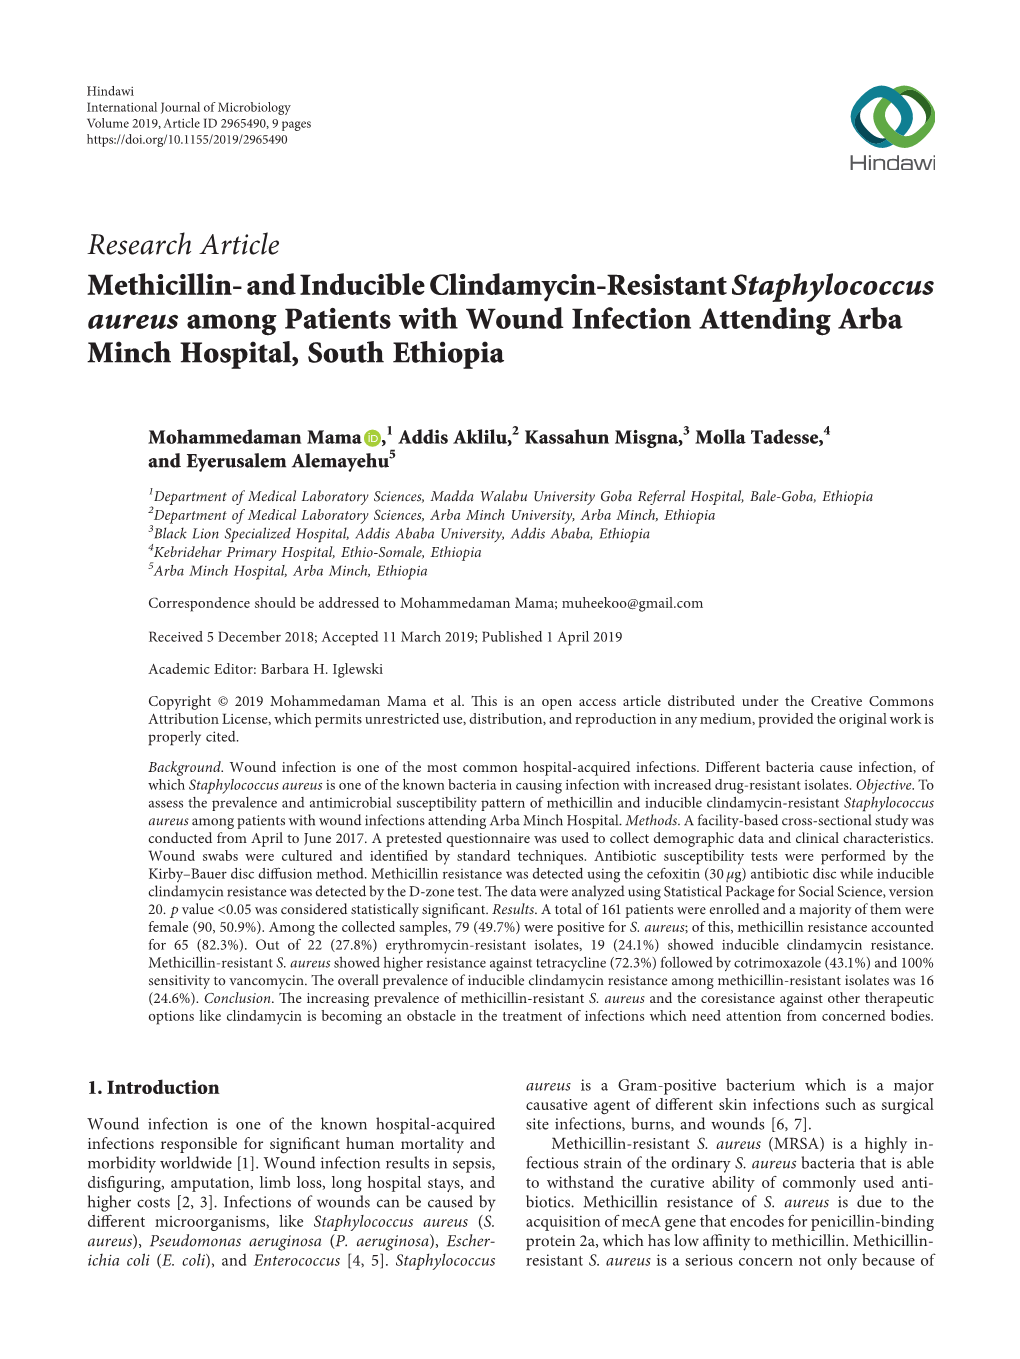 Methicillin-And Inducible Clindamycin-Resistant Staphylococcus Aureus Among Patients with Wound Infection Attending Arba Minch Hospital, South Ethiopia